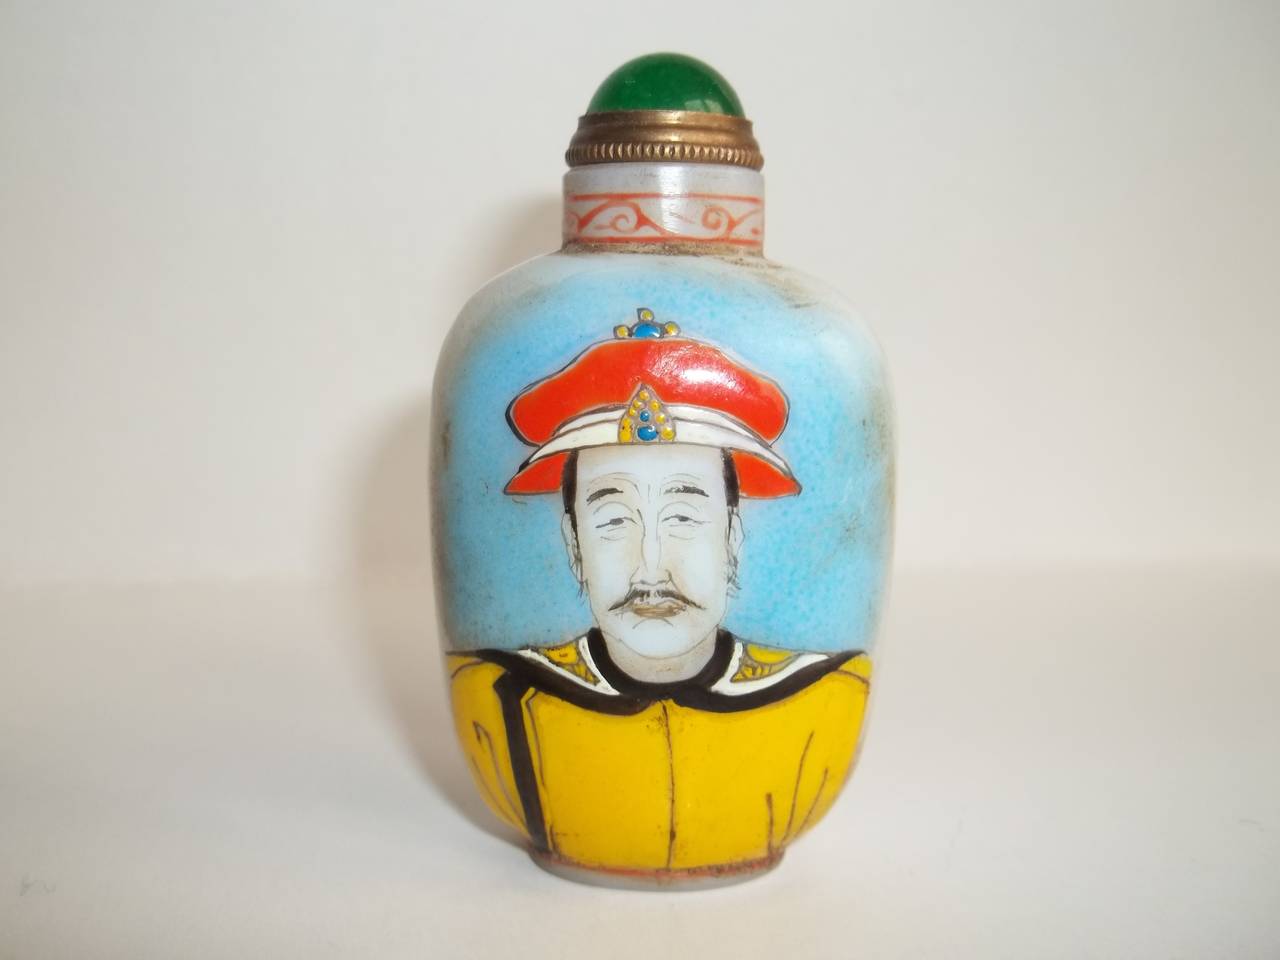 This is a very good 19th Century Chinese Snuff Bottle

It is made of white glass which has then been hand enamelled with the portrait of an Emperor on one side with Chinese characters on the reverse.

There is also a border pattern in red around